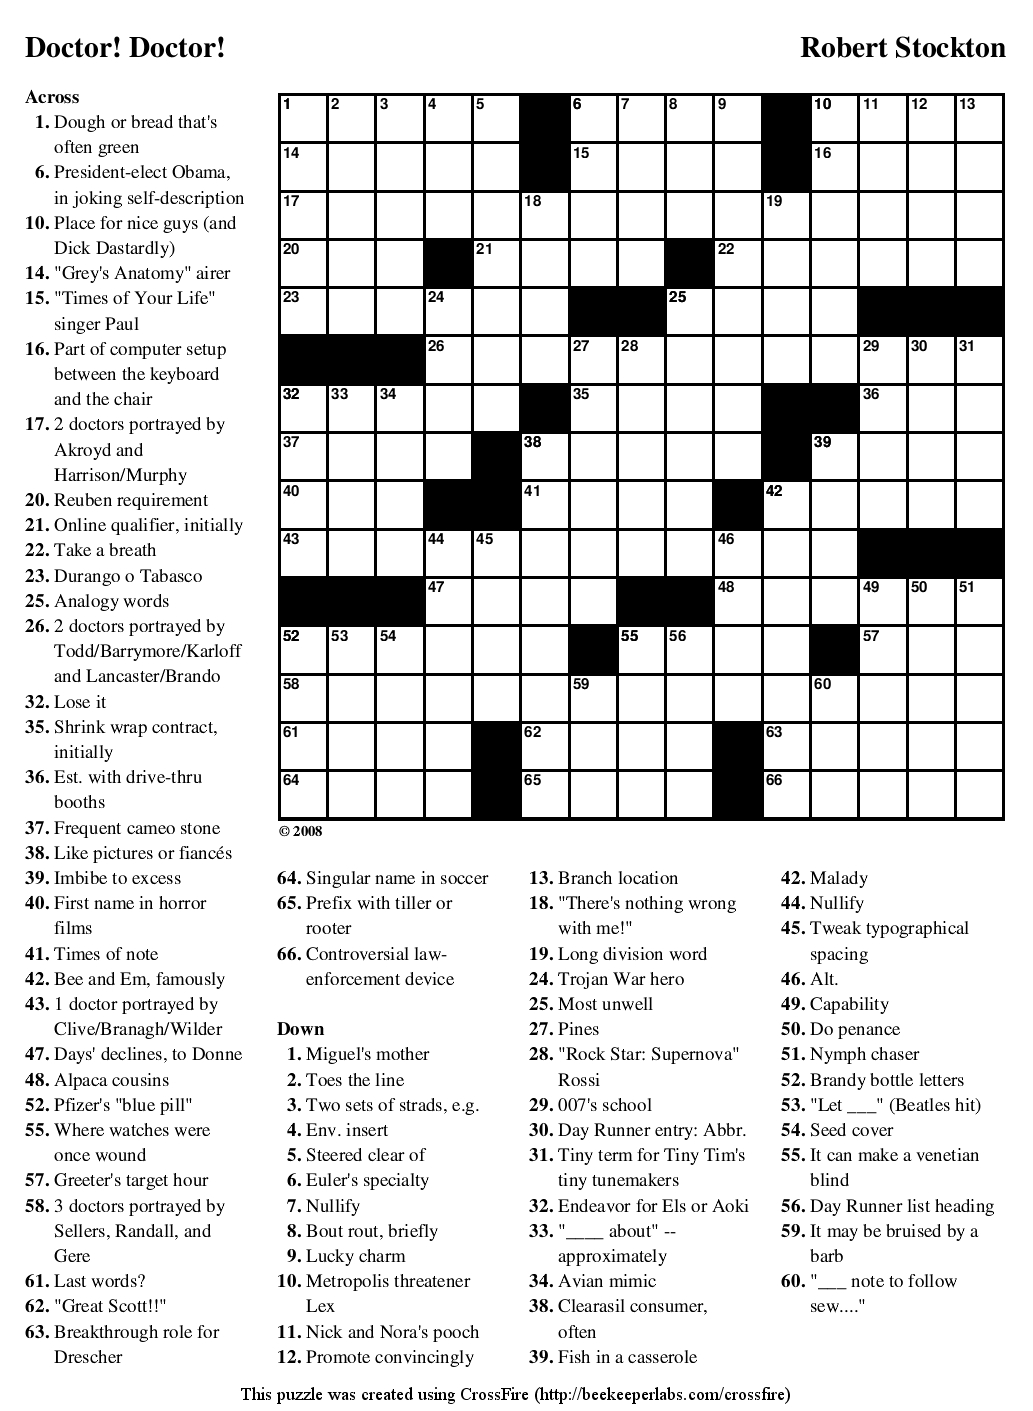 Crossword Puzzles Printable - Yahoo Image Search Results | Crossword - Make Your Own Printable Crossword Puzzles